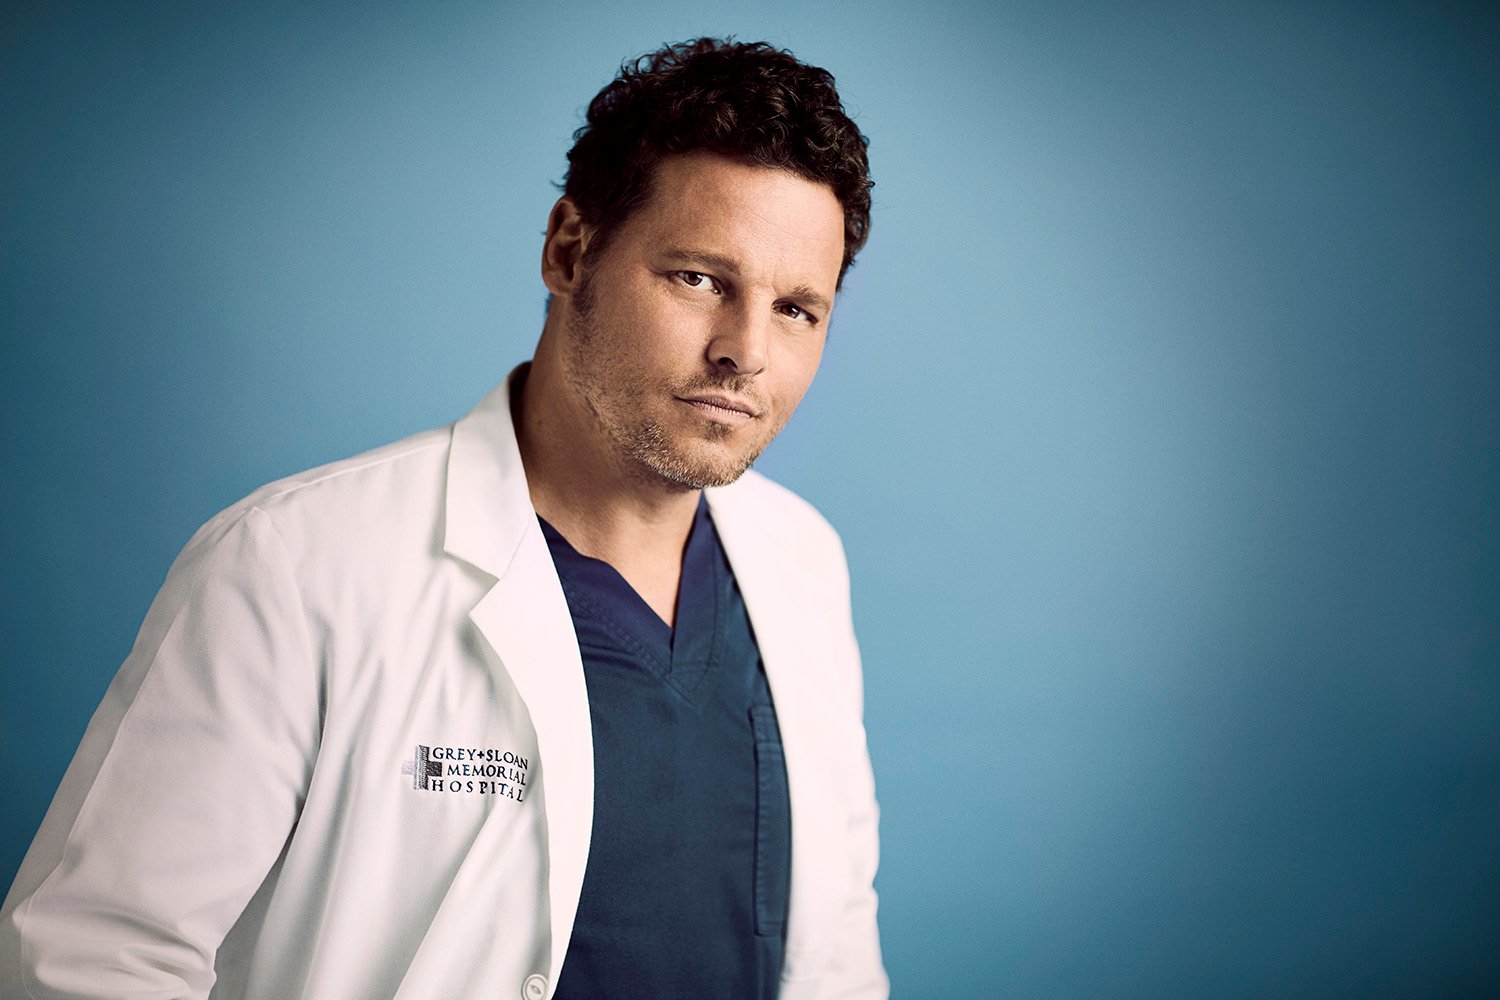 'Grey's Anatomy' actor Justin Chambers as Alex Karev wearing blue scrubs and smirking at the camera.